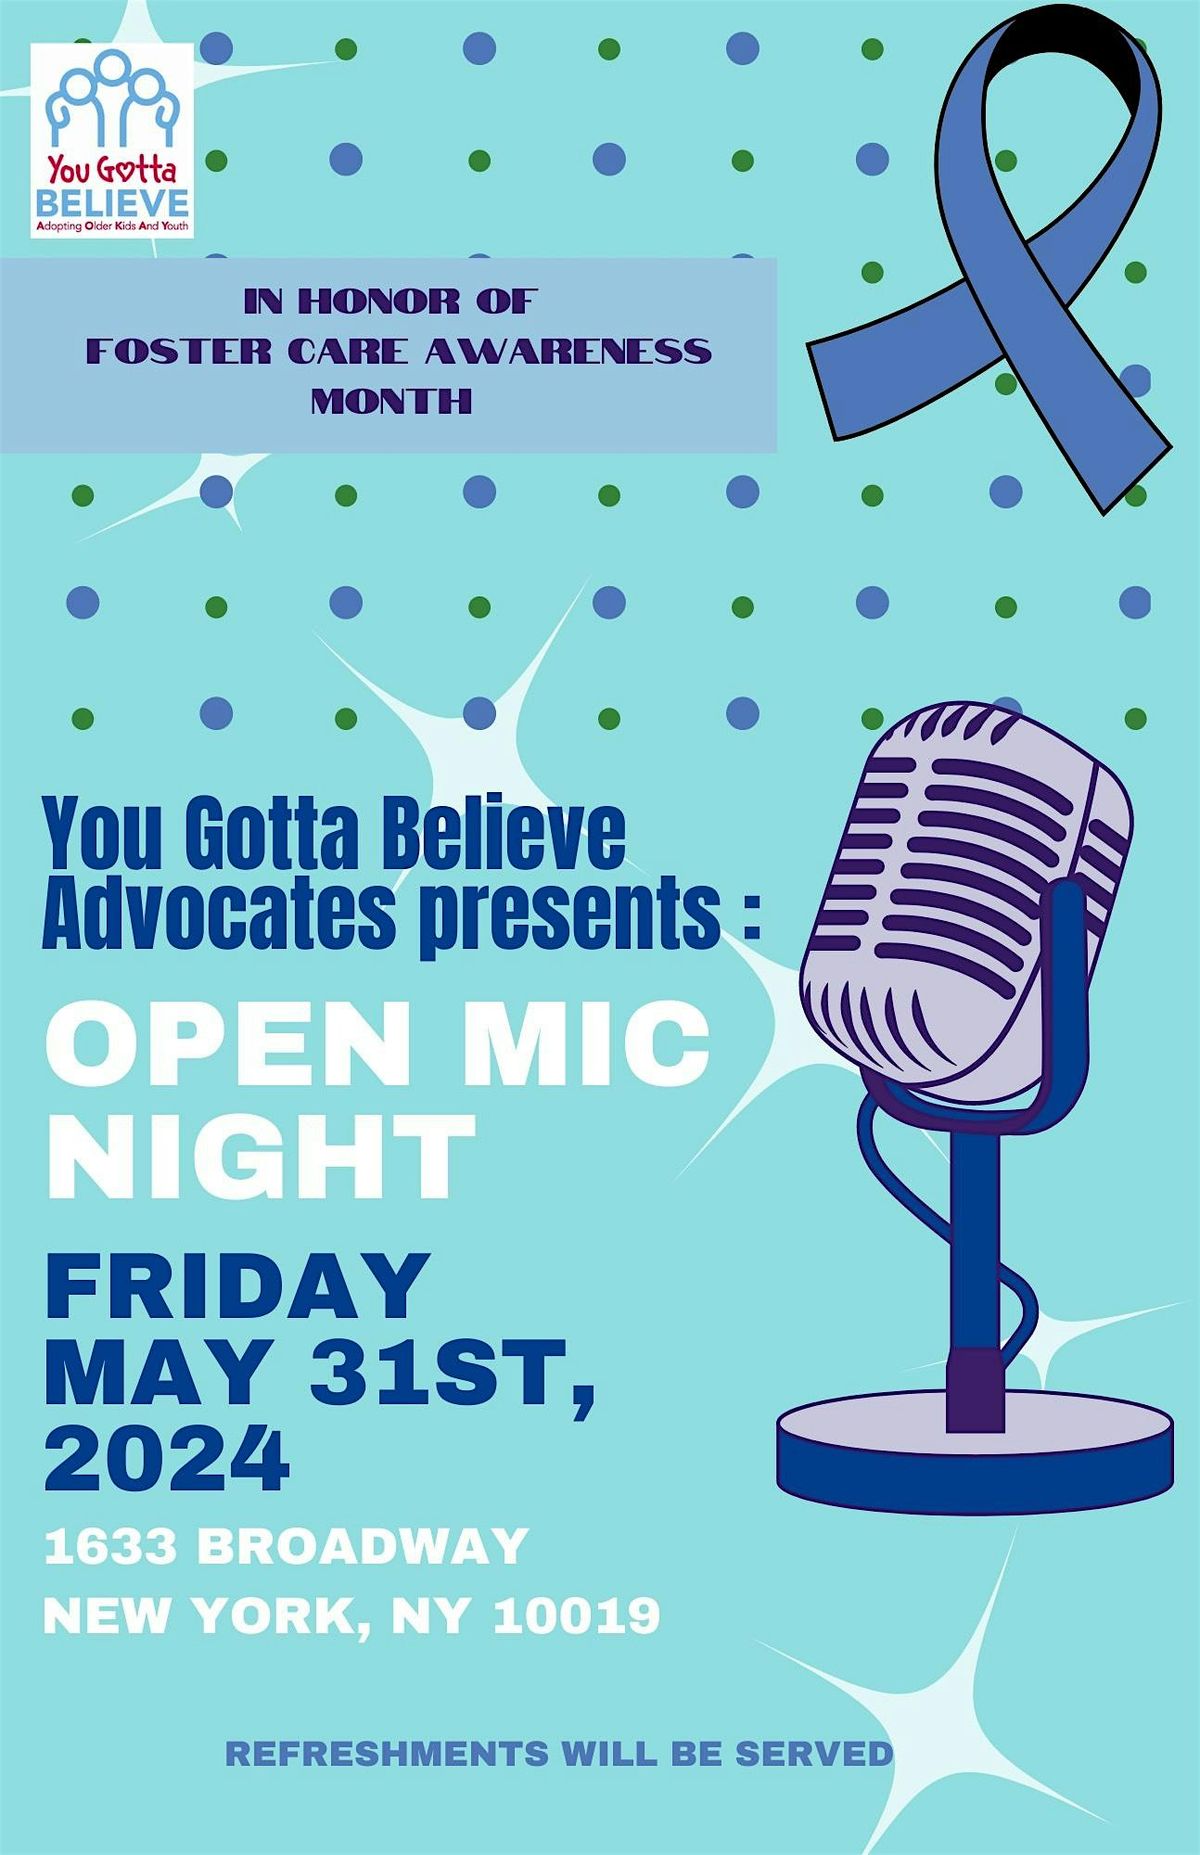 YGB Advocates Present: Open Mic Night for Foster Care Awareness Month